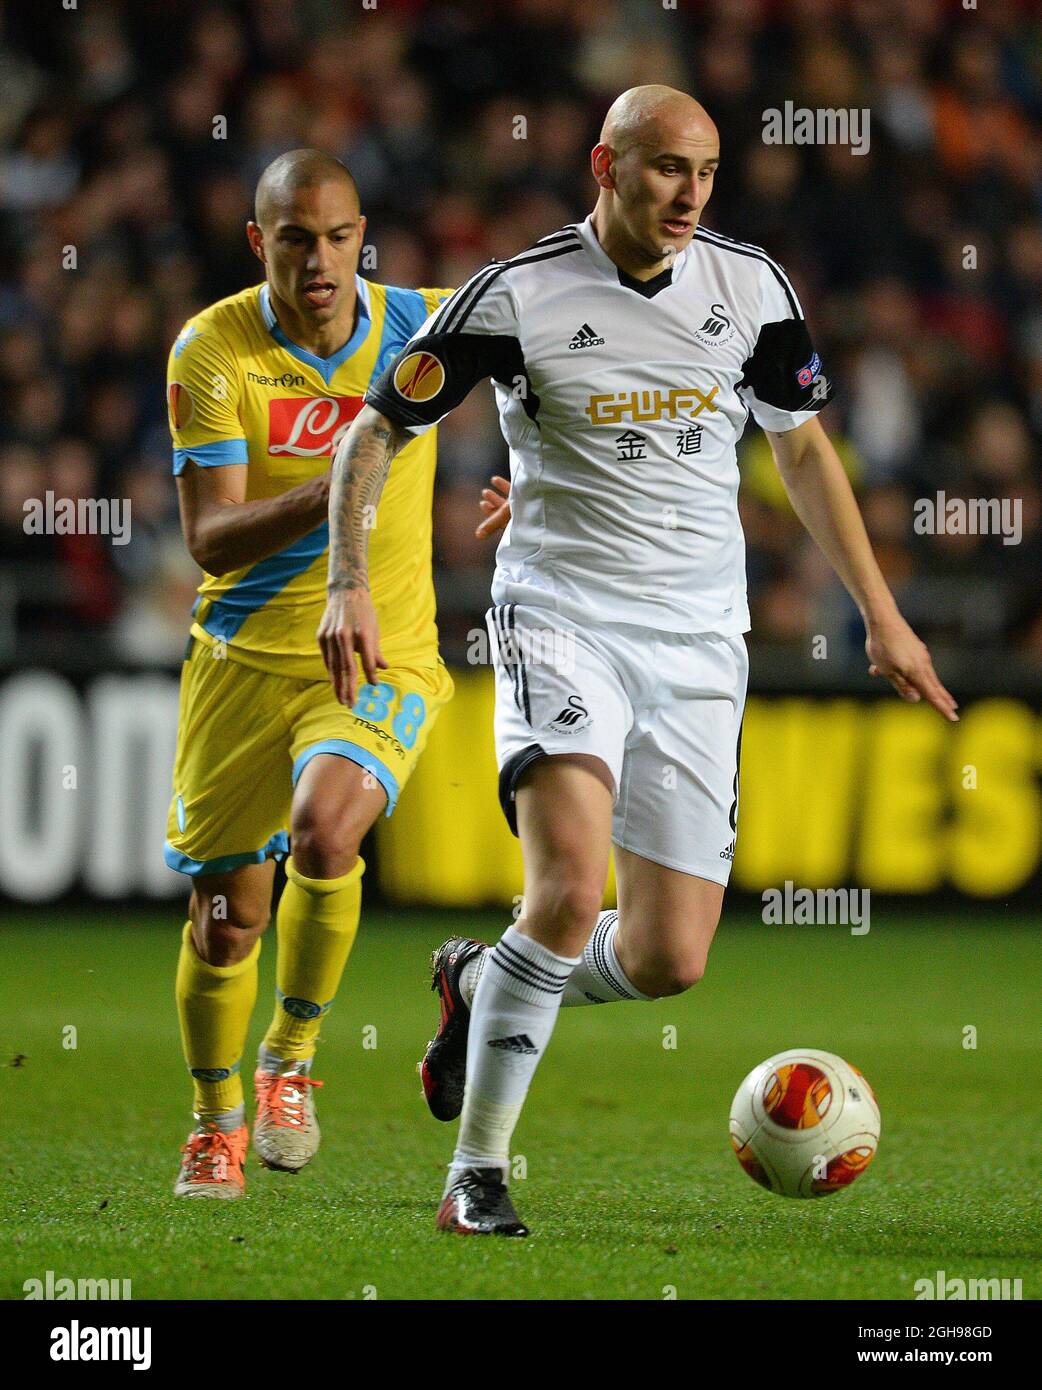 Jonjo Shelvey of Swansea City and Gokhan Inler of Napoli during the UEFA Europa League, round of 32 match between Swansea City and Napoli held at Liberty Stadium in Swansea, Wales on 20th February 2014. Stock Photo